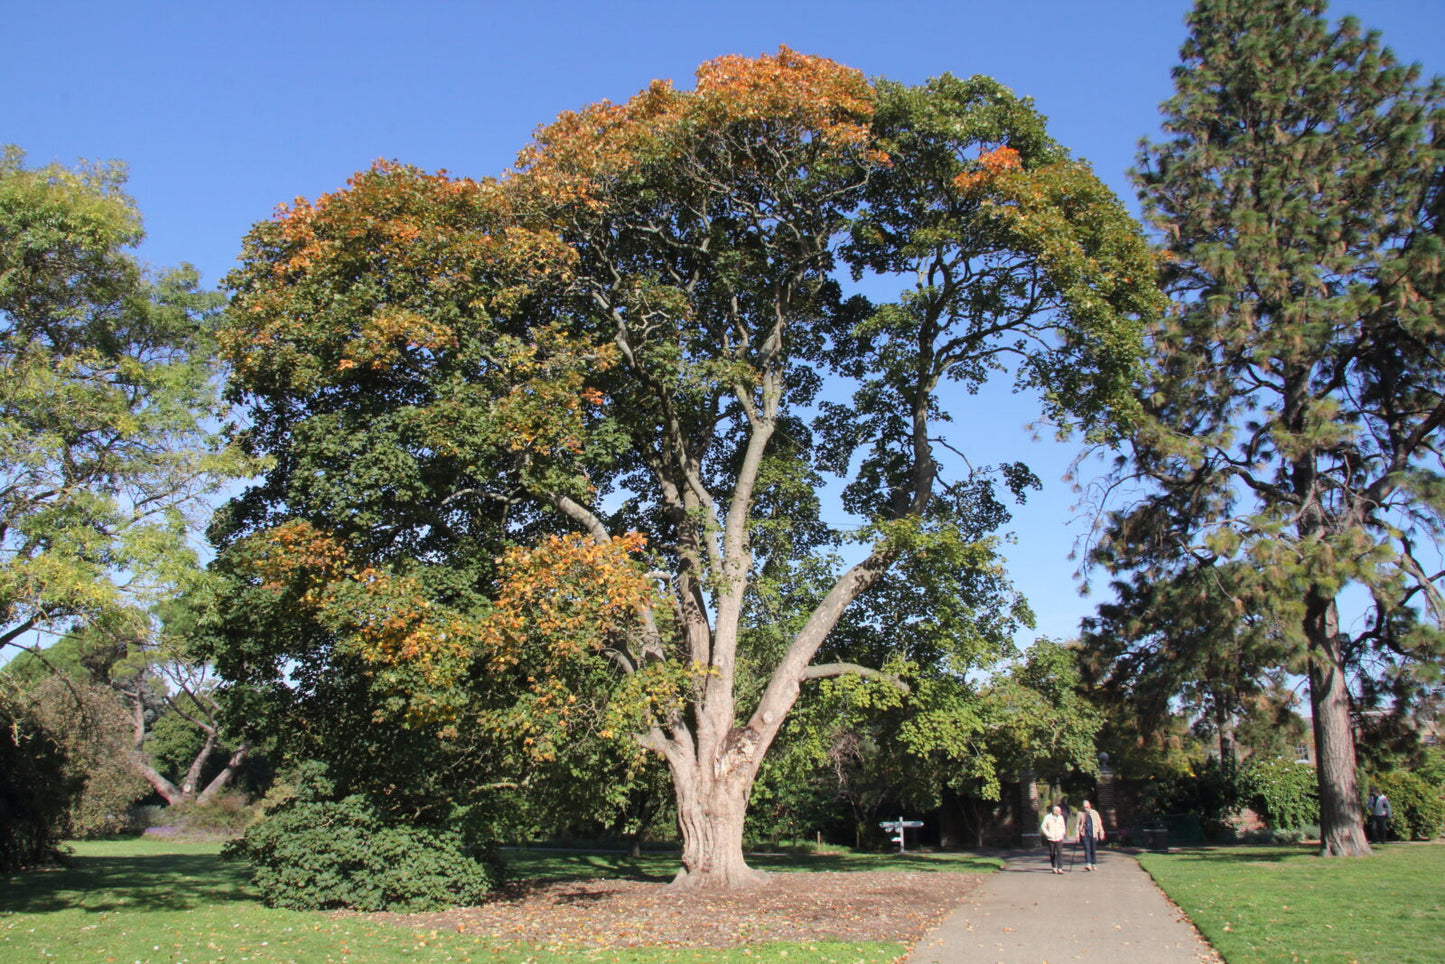 Acer opalus - Neapolitan maple (Forestry maple)